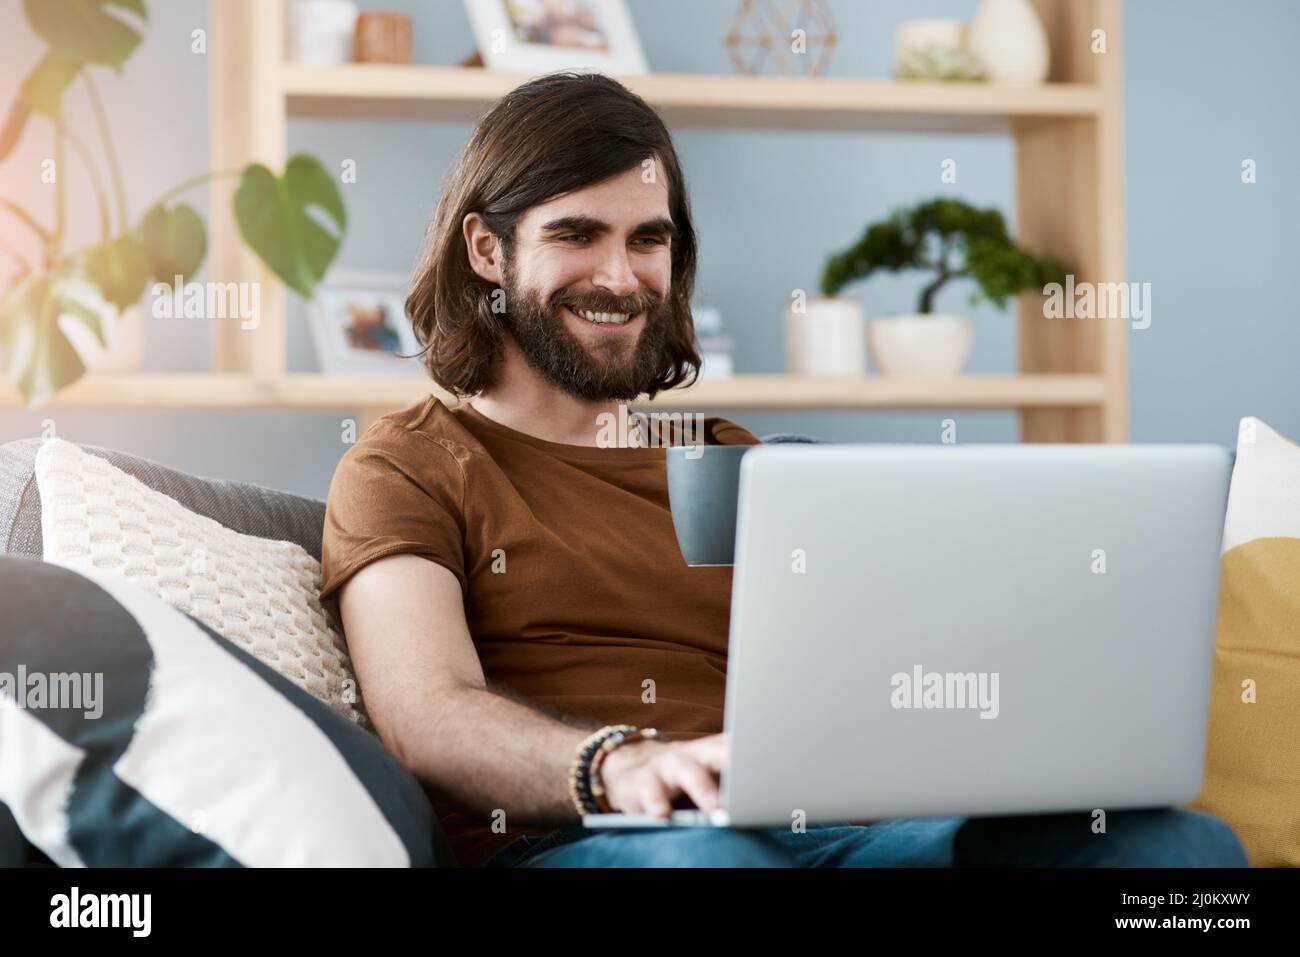 Hes in a good mood today. Shot of a handsome young man using his laptop while relaxing on a sofa in his living room. Stock Photo